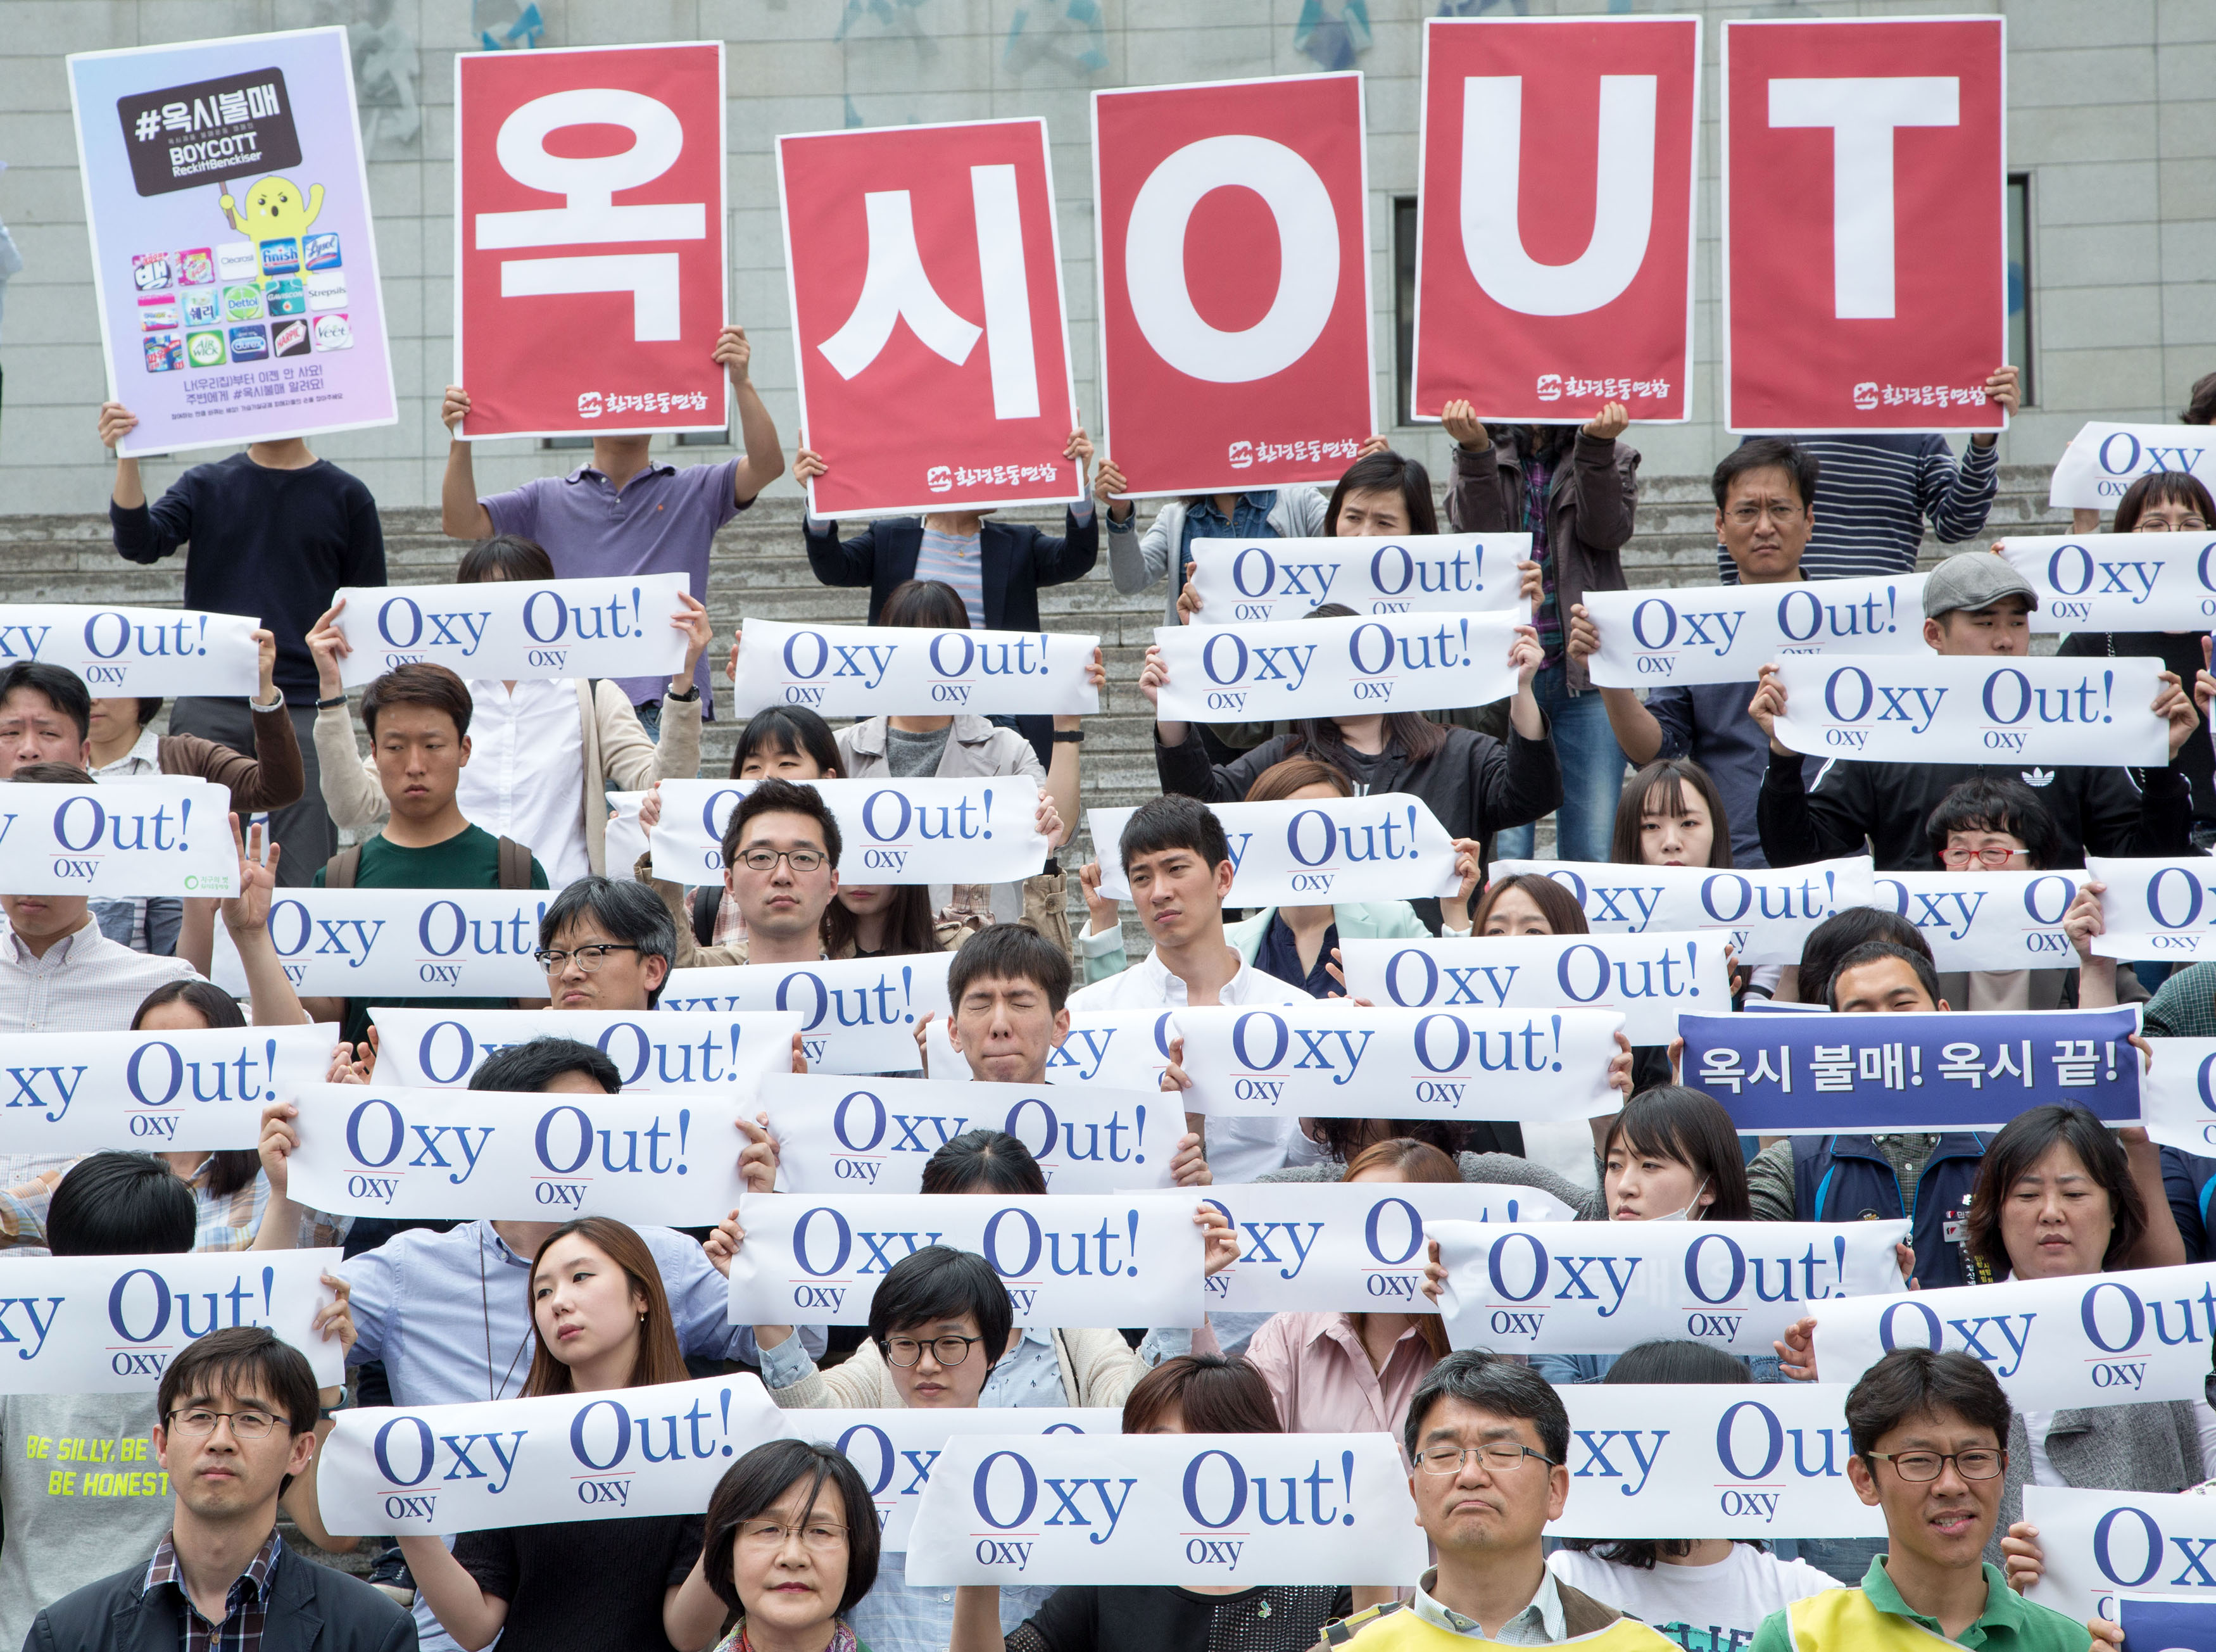 South Korean protesters who claim that a sterilizing hygiene product made by Reckitt Benckiser has led to deaths in South Korea demonstrate n in Seoul on May 9, 2016 (Lee Young-ho—AP)